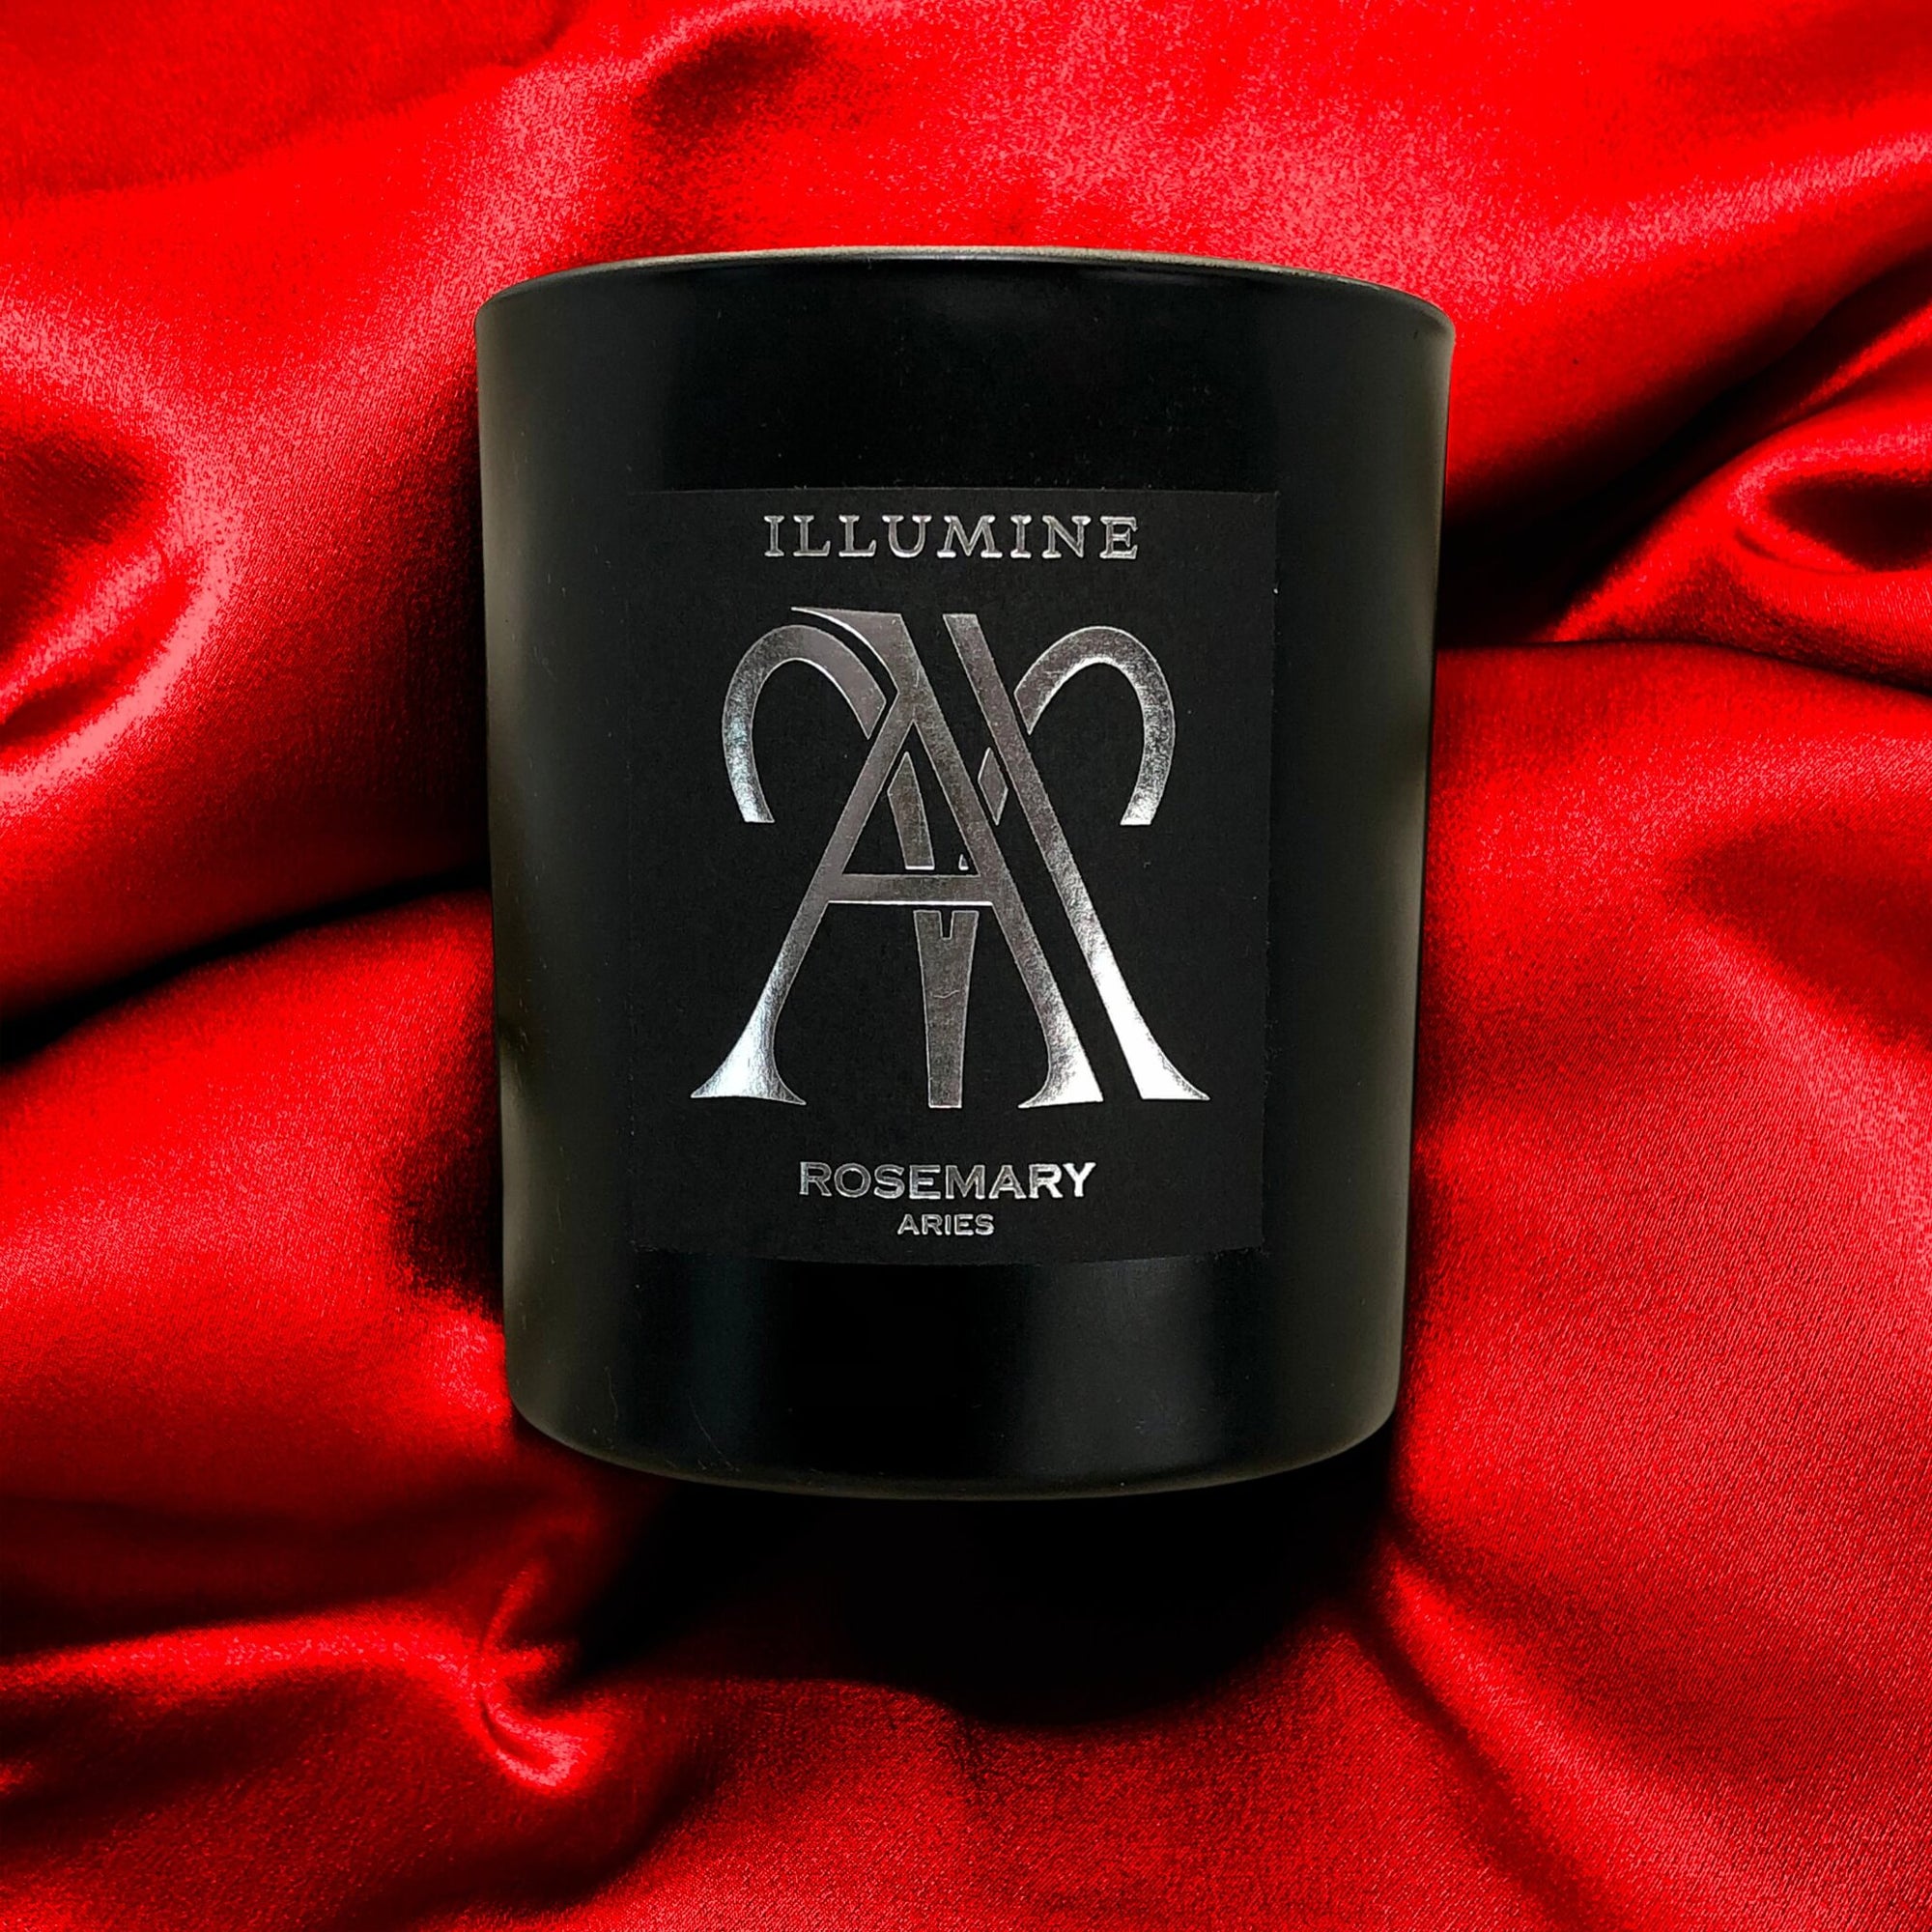 Illumine Aries Candle on Red  for Dynamic